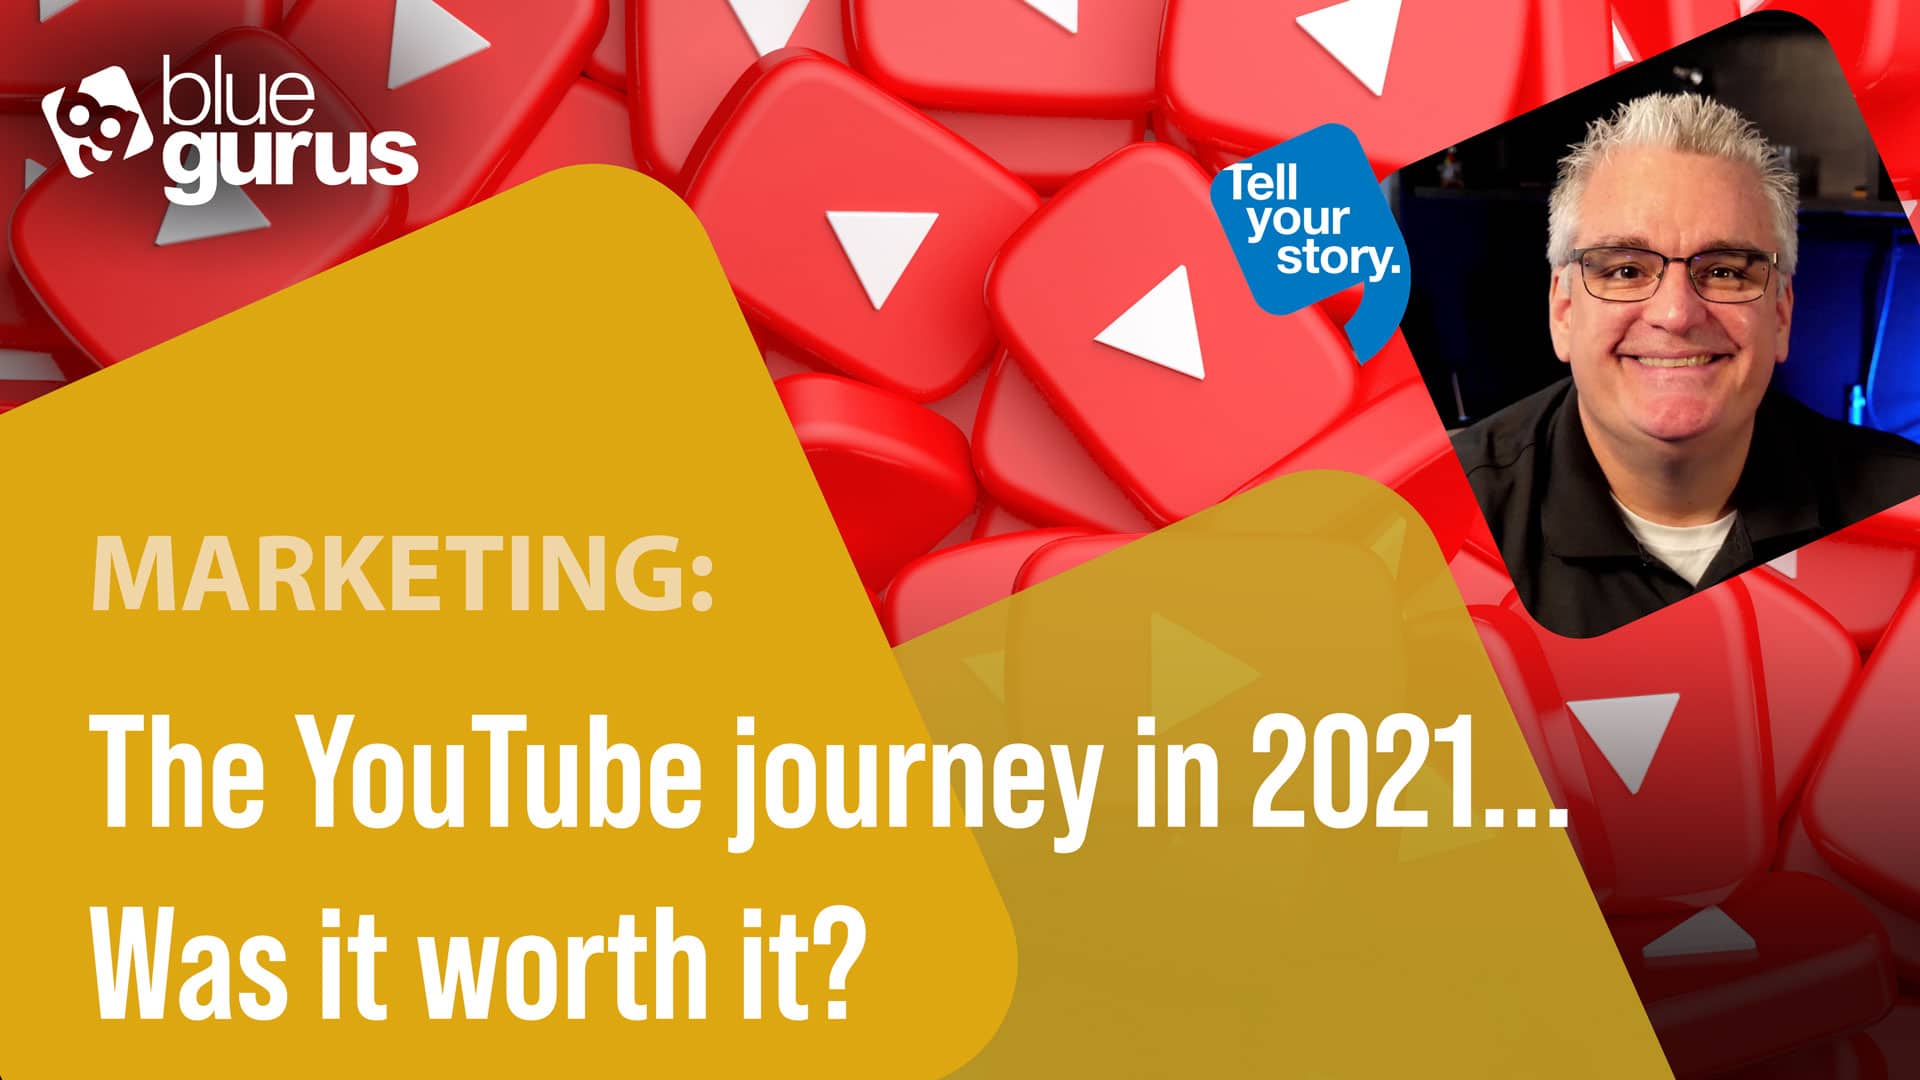 Was the YouTube journey in 2021 worth it?